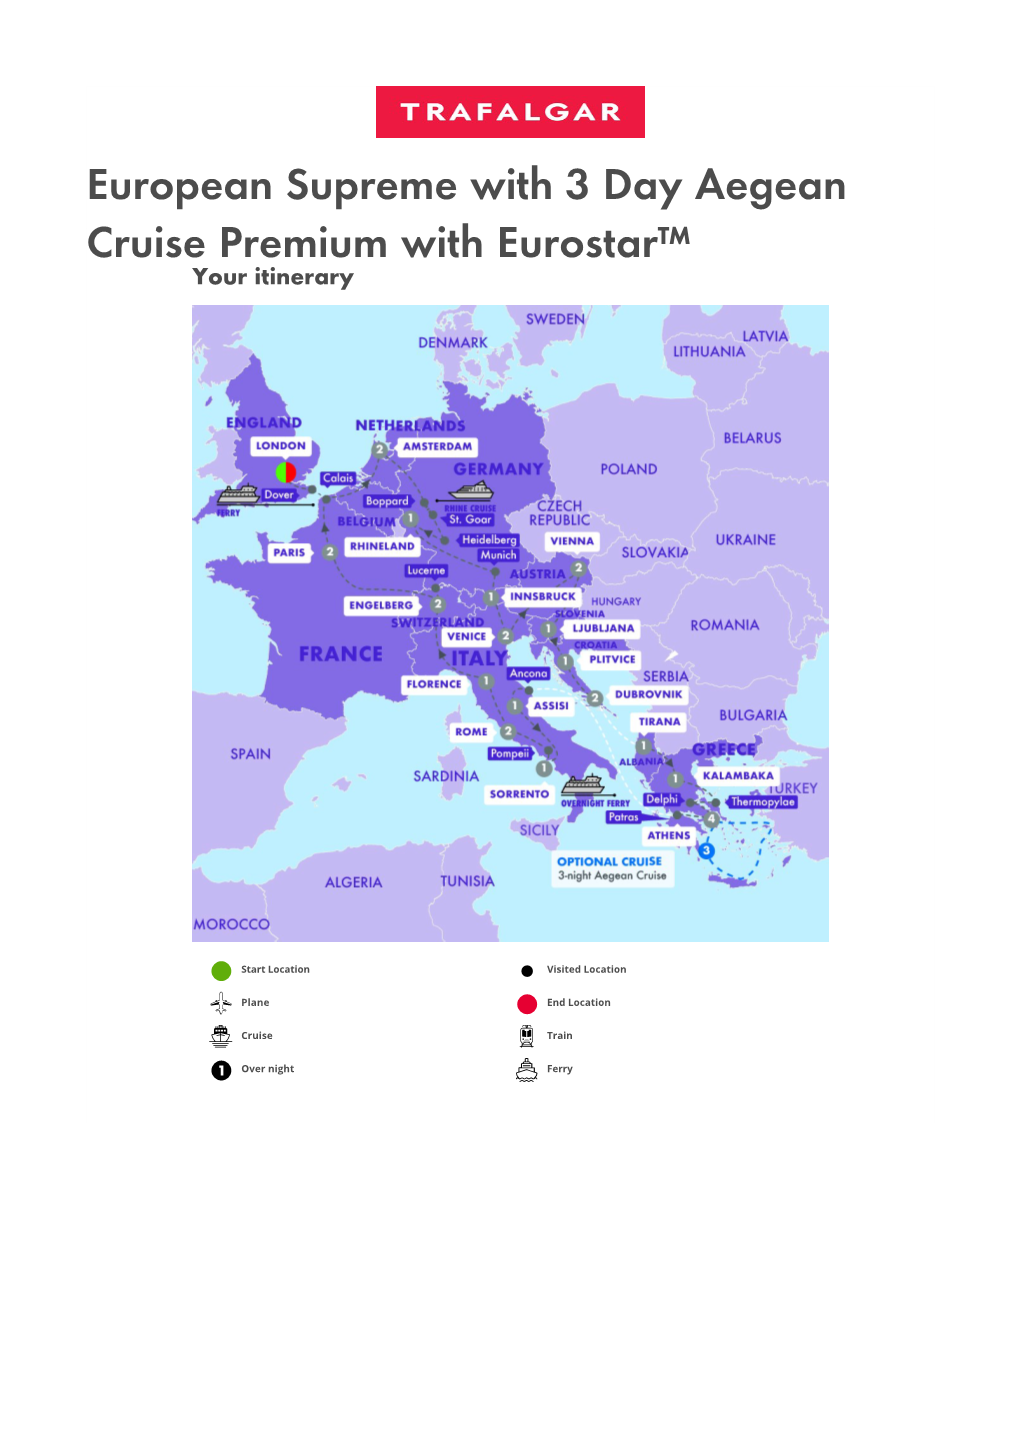 European Supreme with 3 Day Aegean Cruise Premium with Eurostar™ Your Itinerary